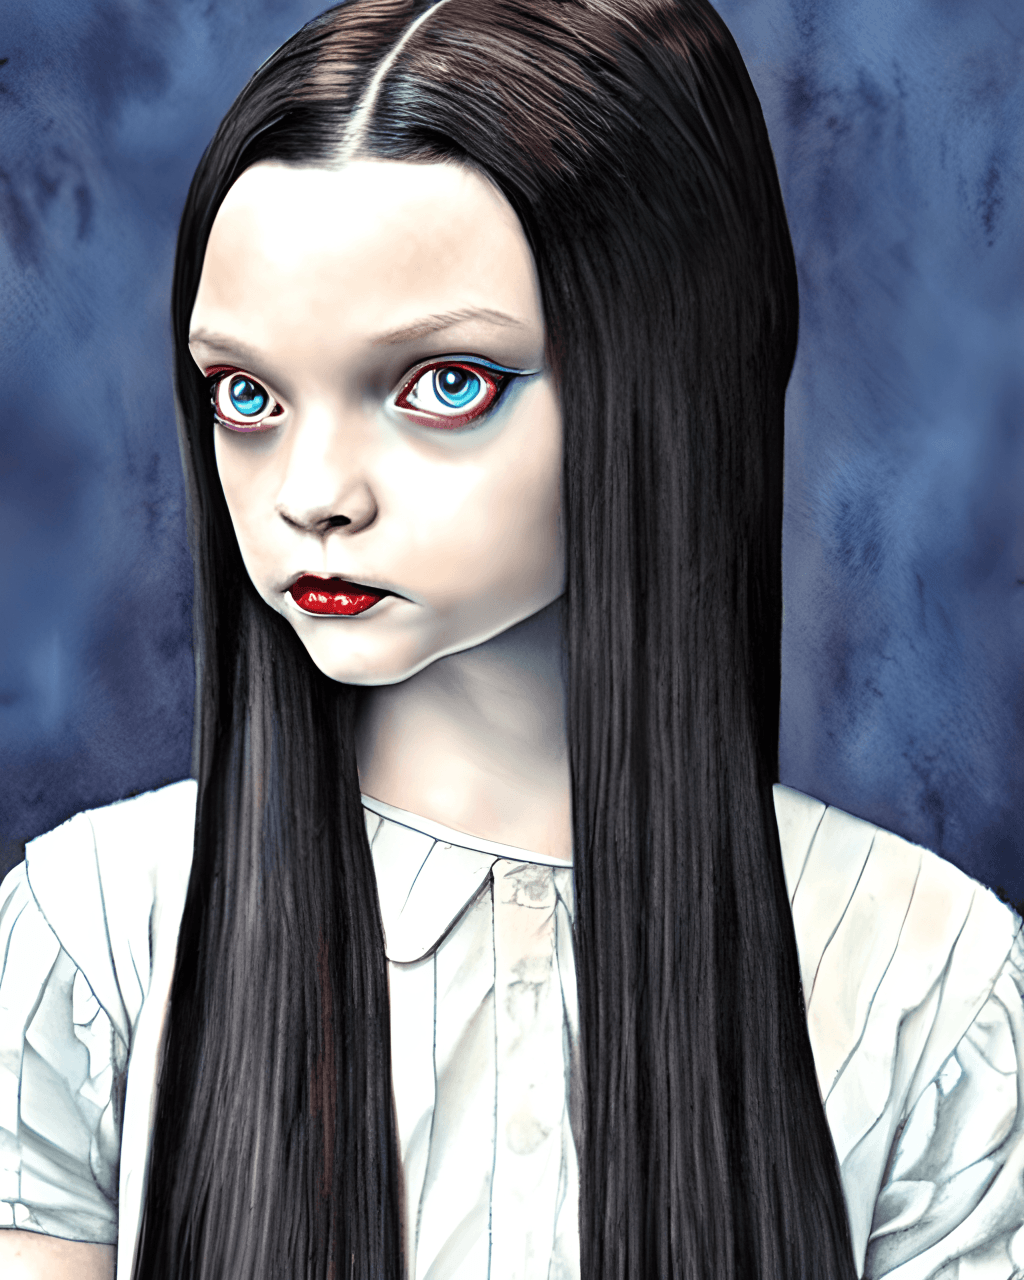 Wednesday Addams from Addams Family Movie Stunning Ultra Realistic Soft ...